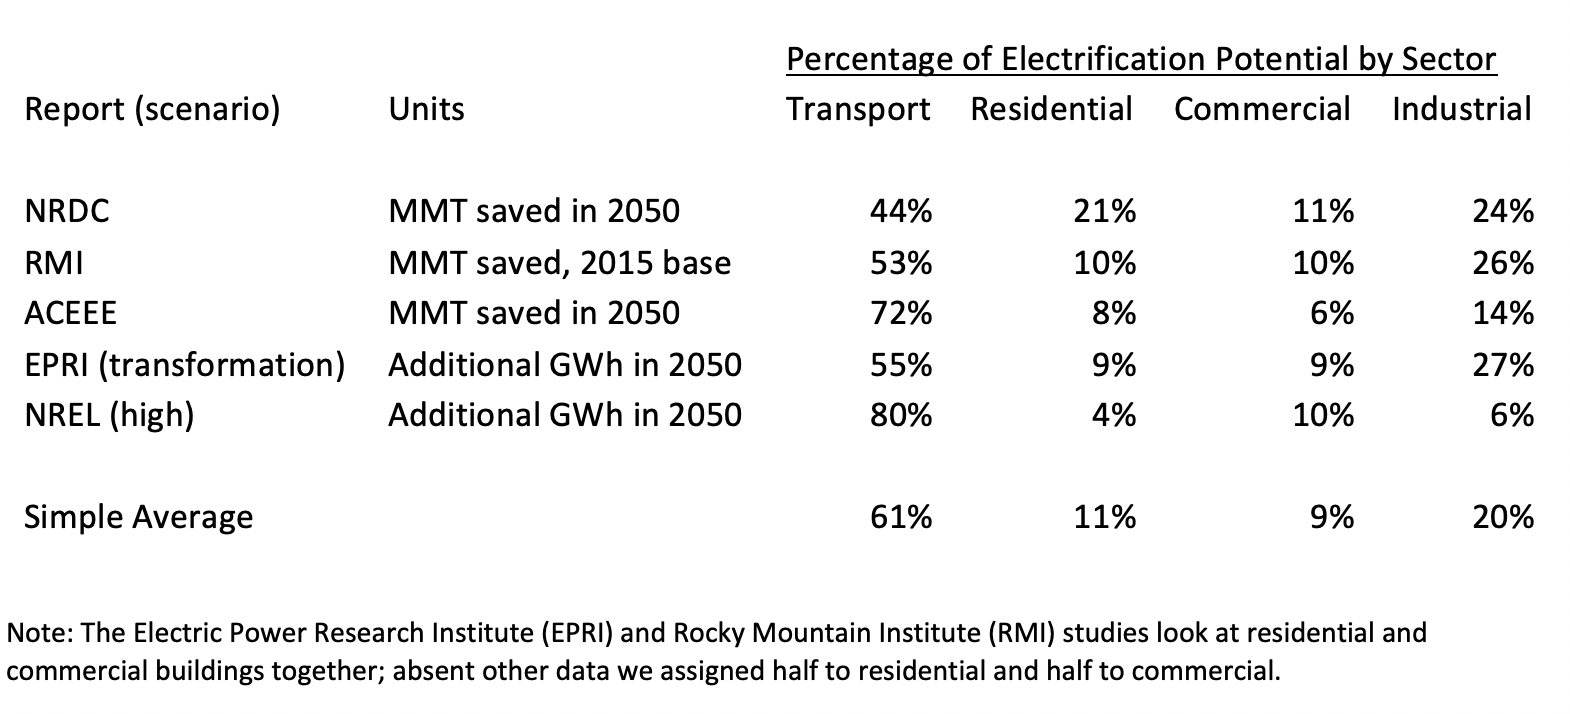 Percentage Electrification Potential By Sector - Table